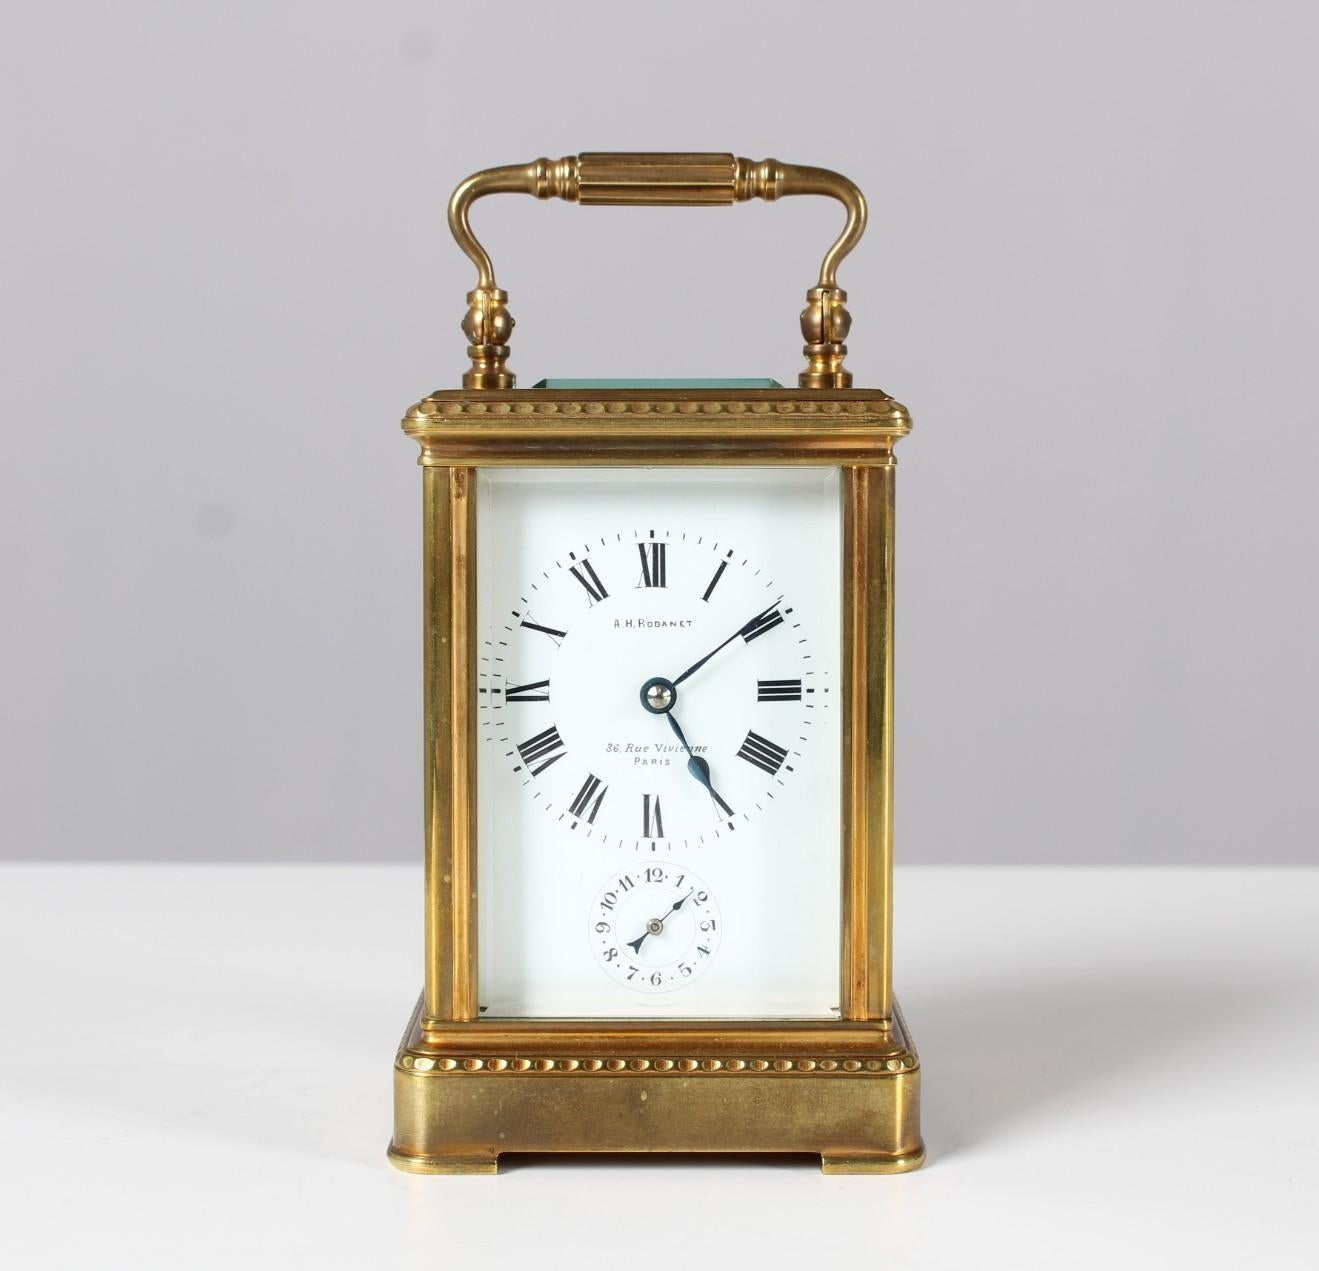 Antique french travel alarm clock

Paris
Brass, glass, enamel
around 1880

Dimensions: H x W x D: 12 x 8 x 7 cm

Description:
5-Sided glazed carriage clock. Carriage Clock with alarm strike on bell.

Enamel dial with black hands and Roman